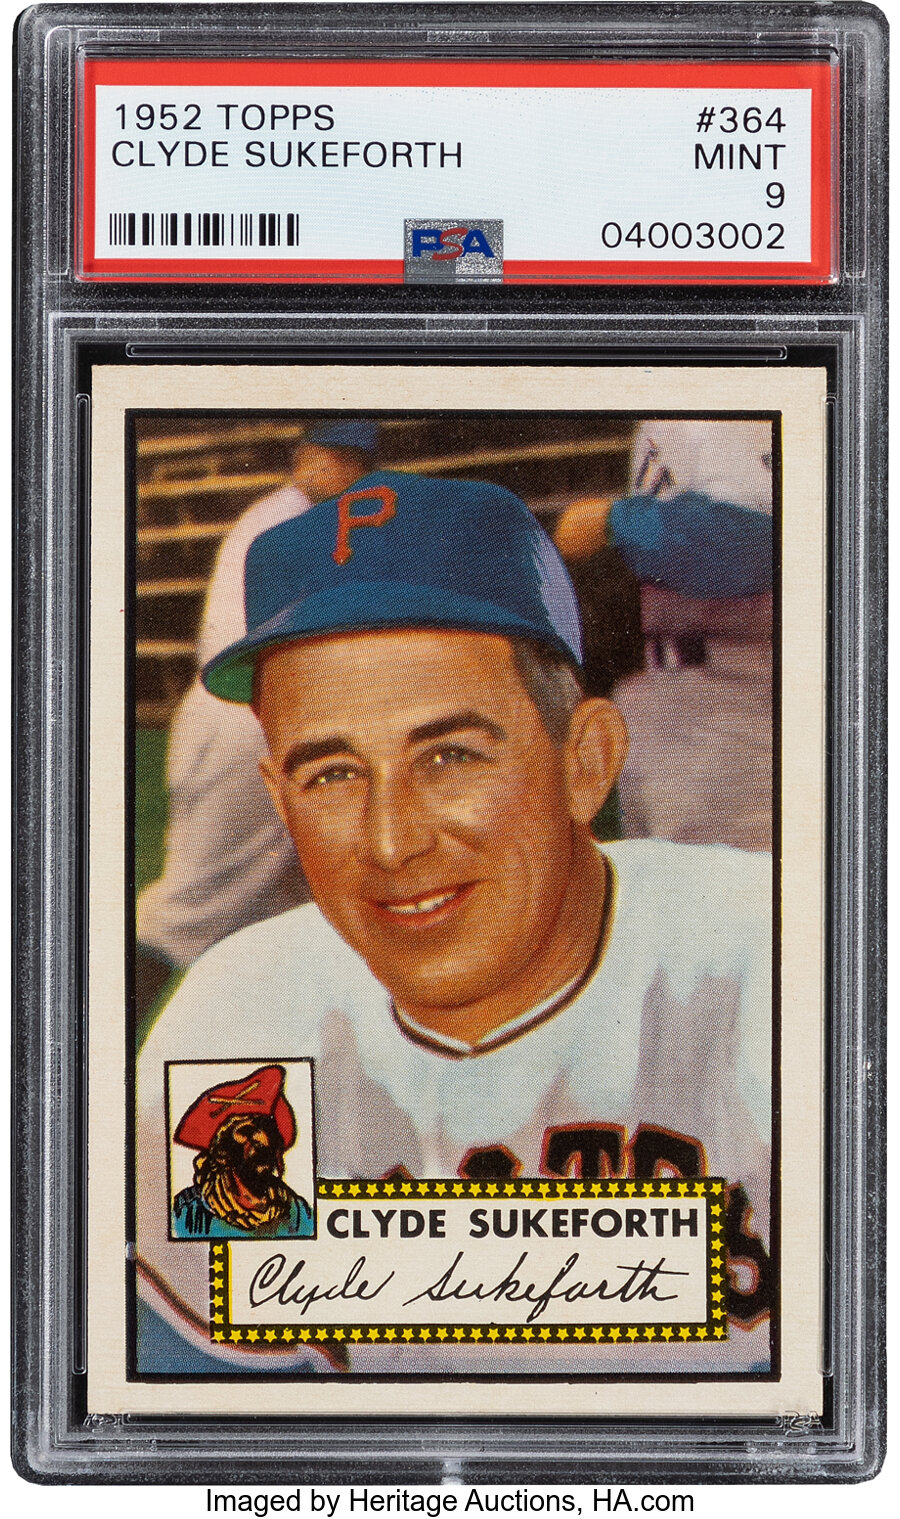 1952 Topps Clyde Sukeforth Rookie #364 PSA Mint 9 - Only One Higher